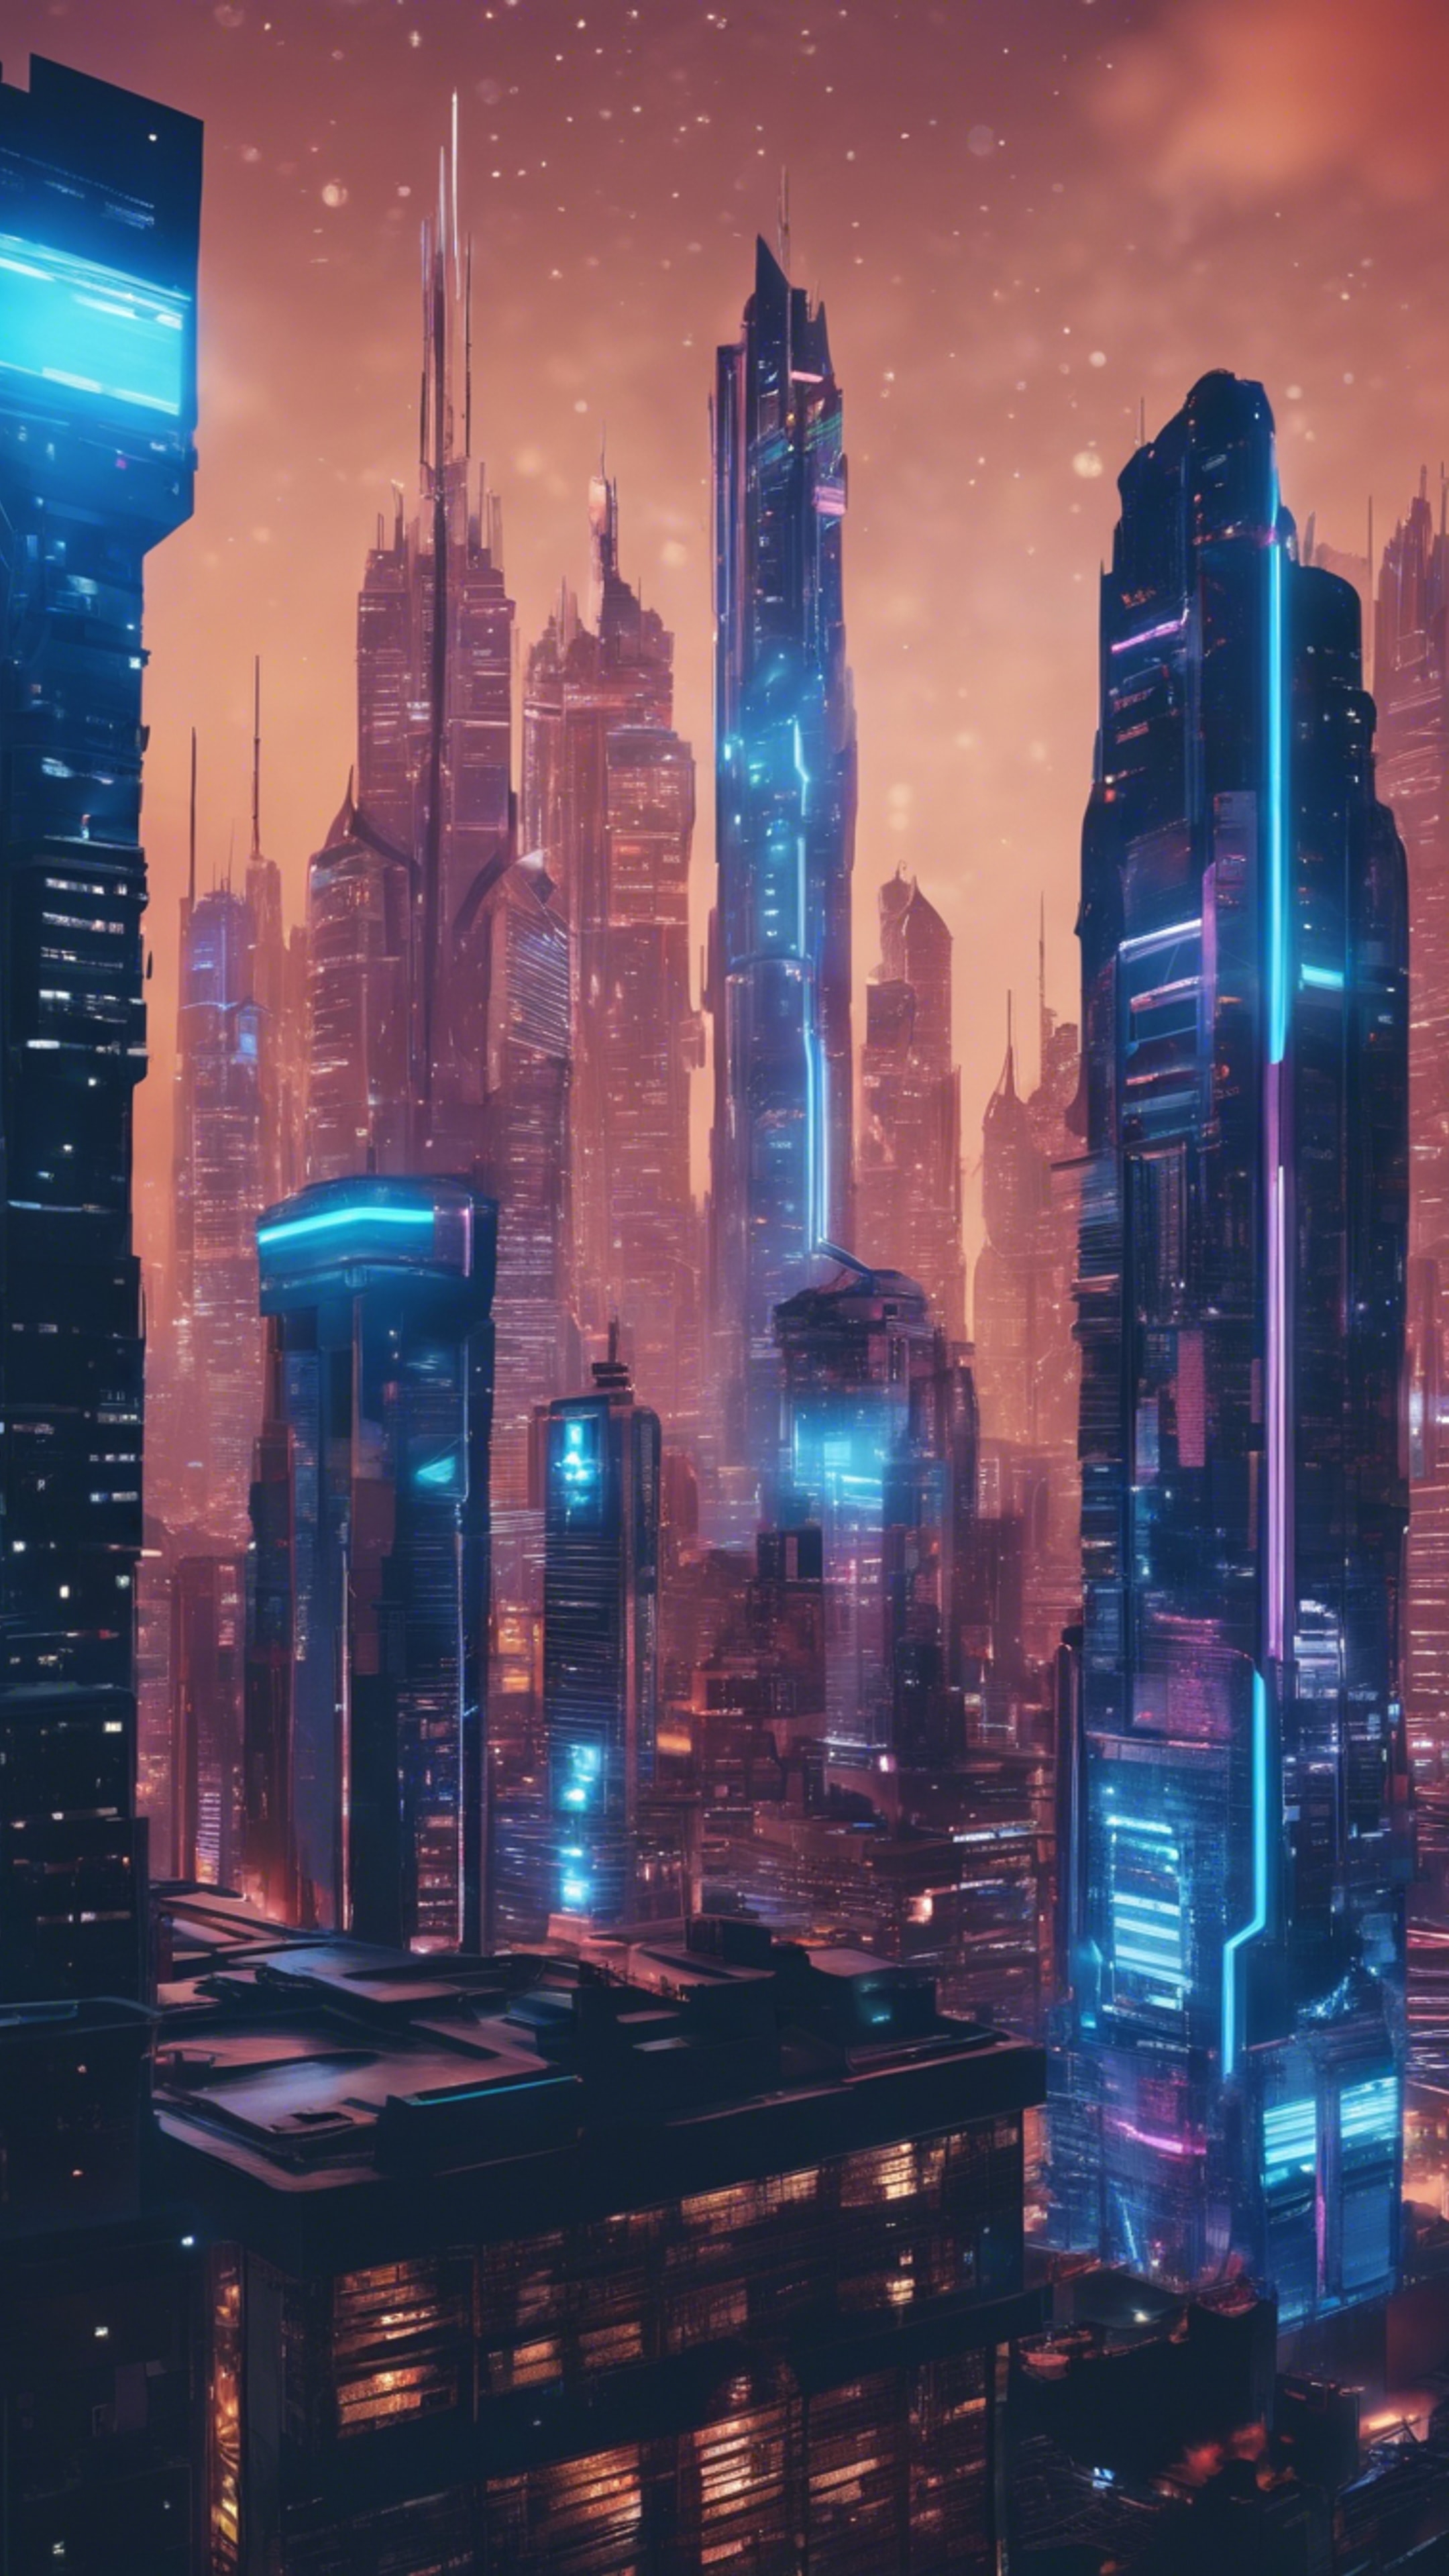 A futuristic city glowing with vibrant neon-blue lights and skyscrapers piercing the night sky. 벽지[2f3a3bdee3e14a4e9359]